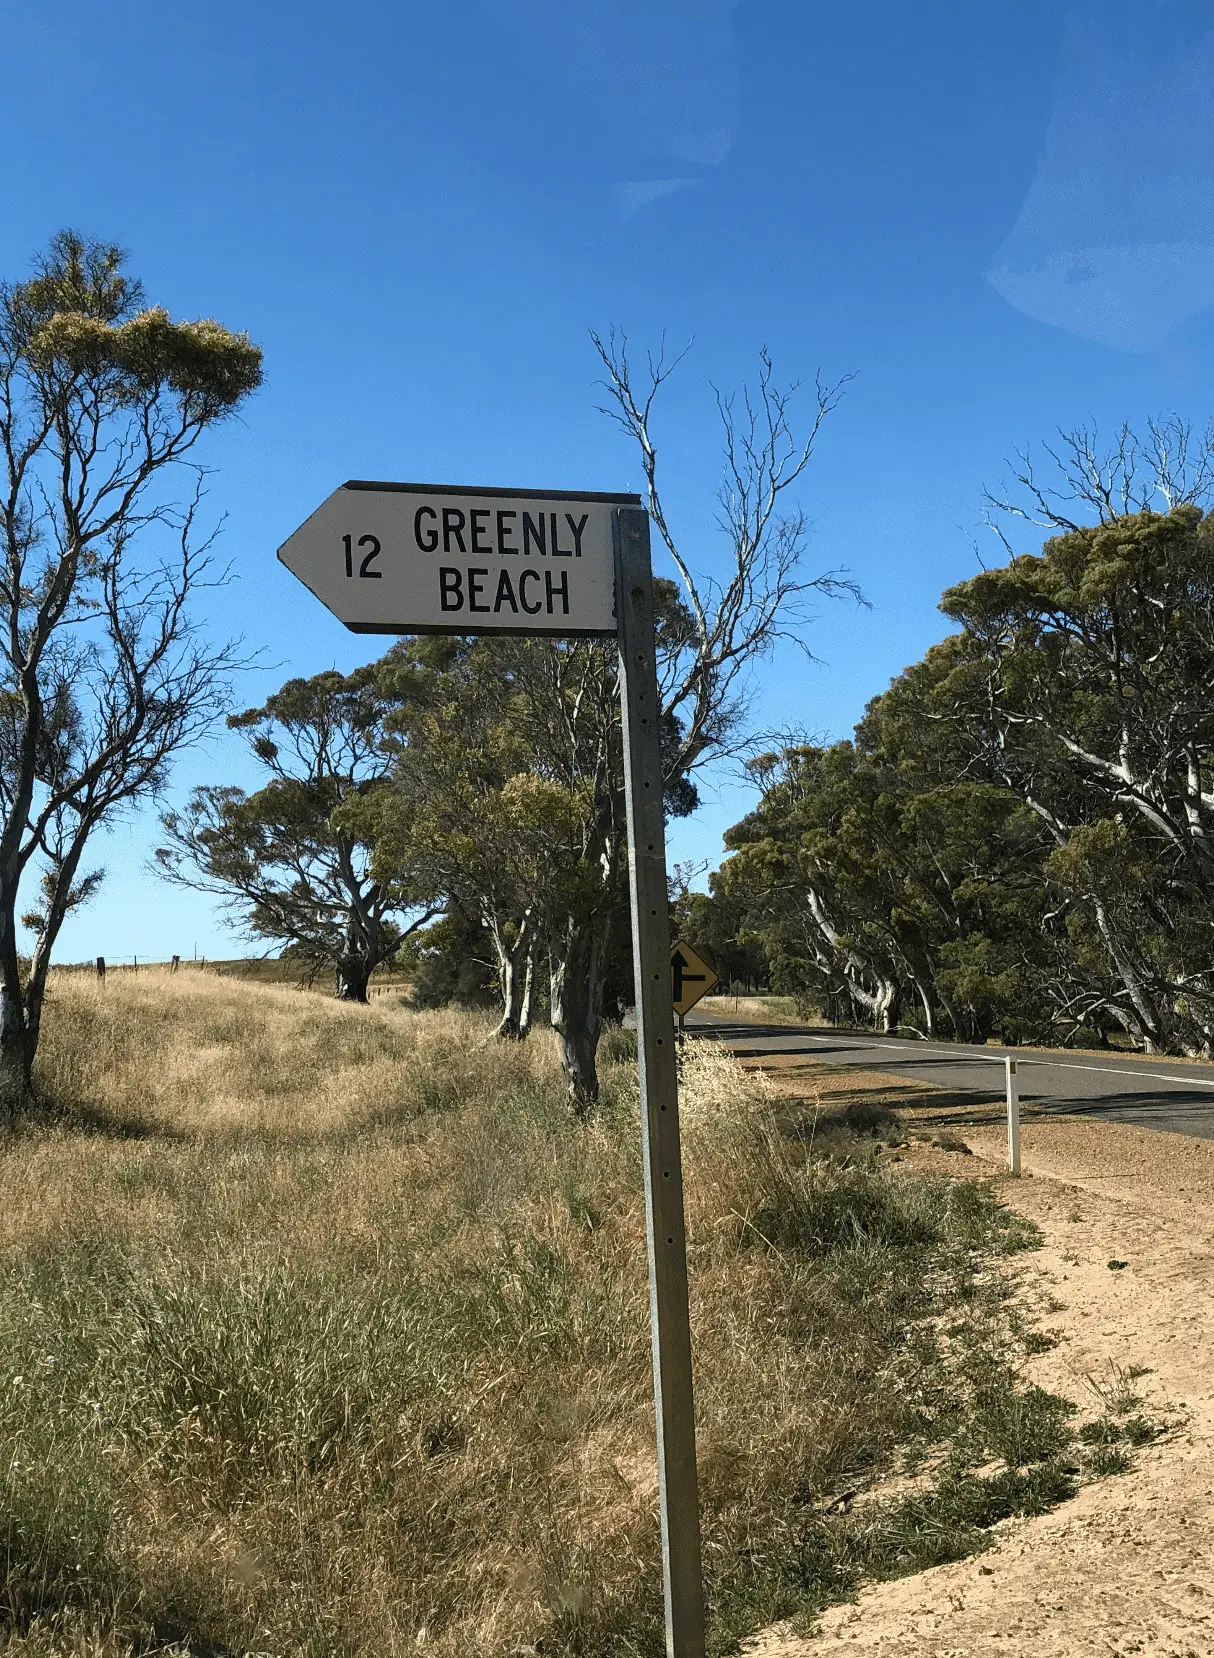 Directions to greenly beach